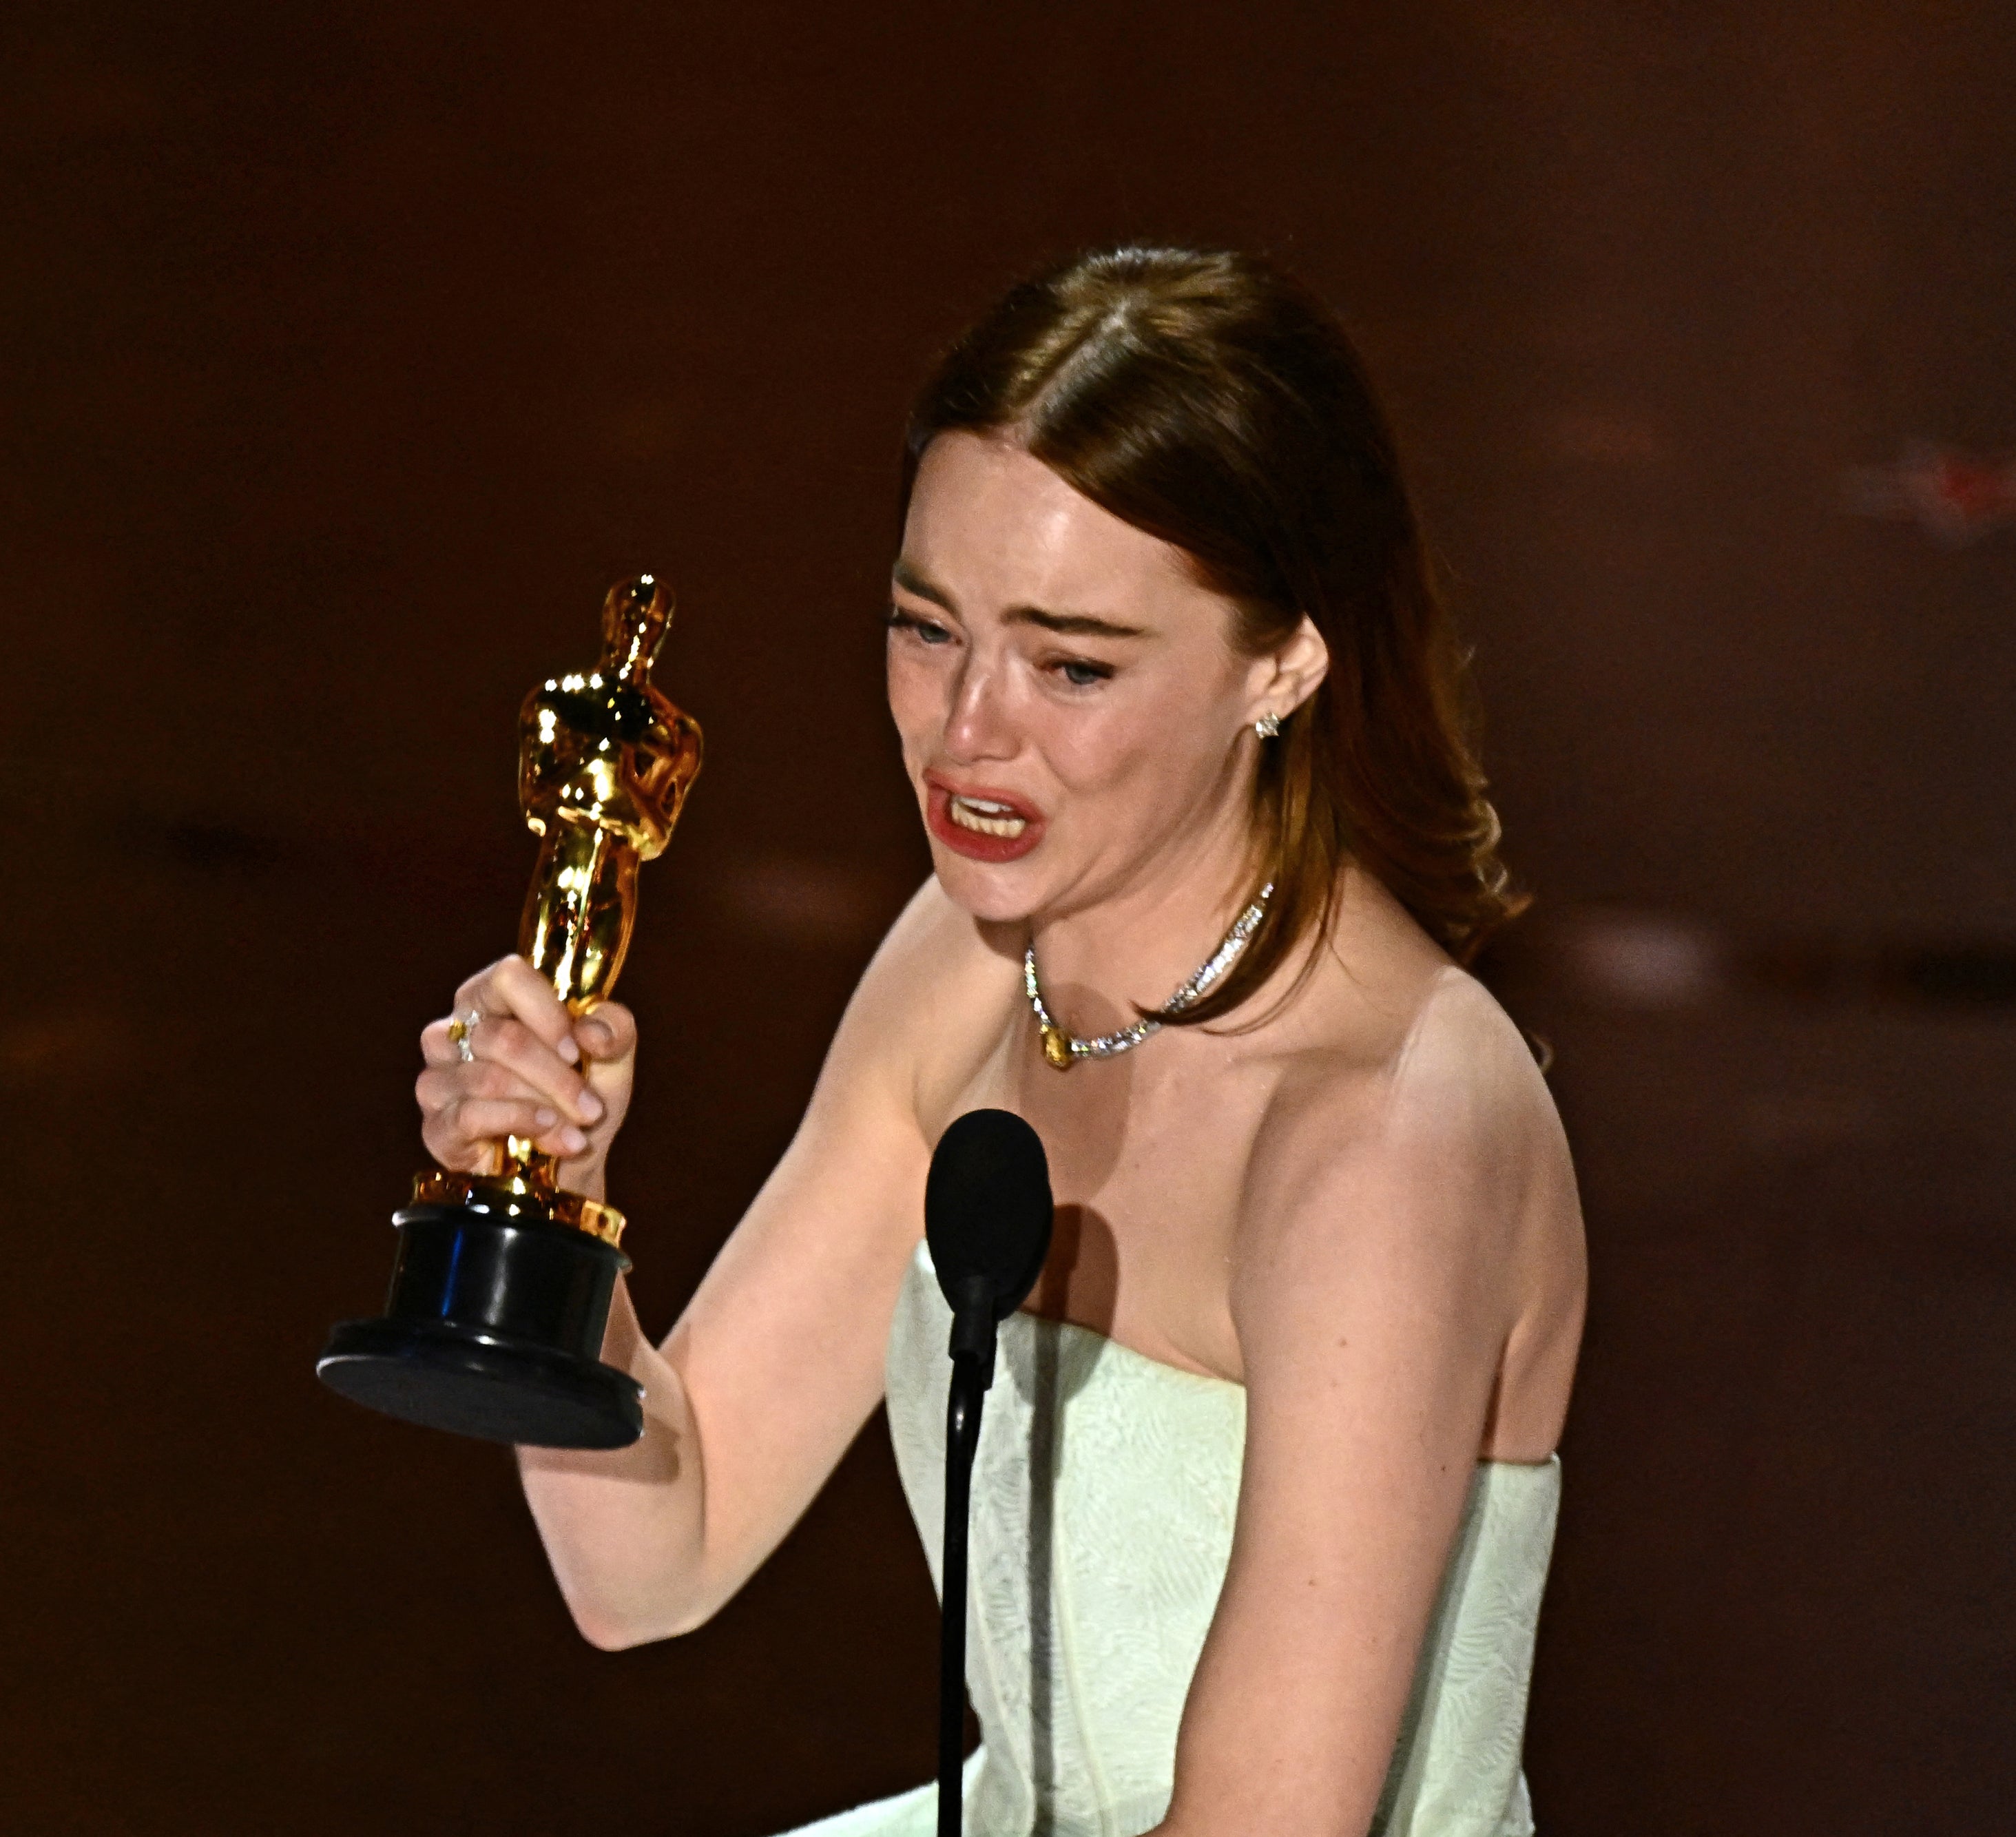 An emotional Emma holding up her award onstage